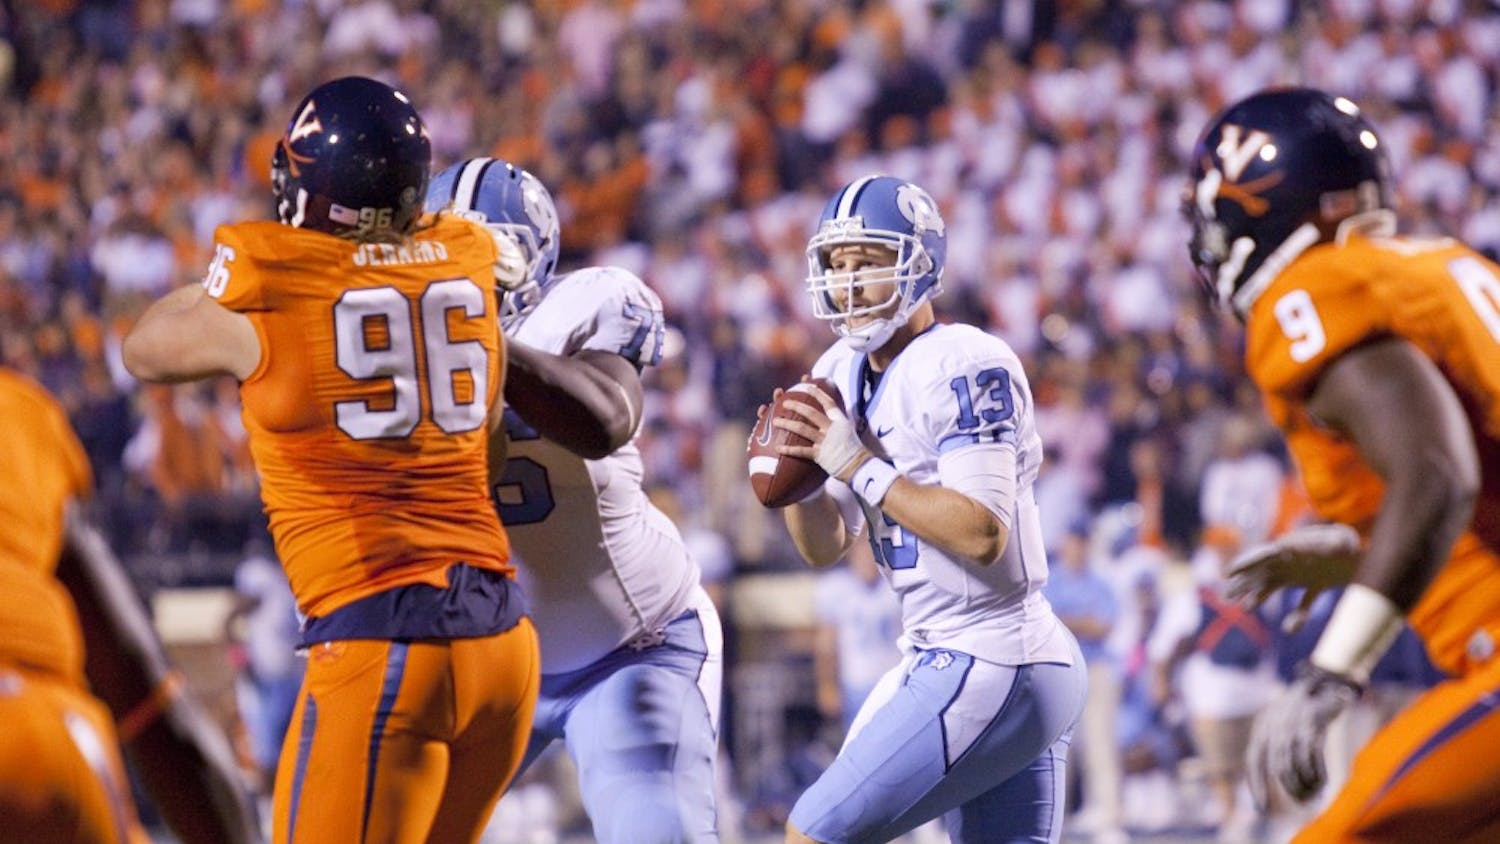 Senior quarterback T.J. Yates passed for 325 yards in the Tar Heels' 44-10 victory over Virginia.